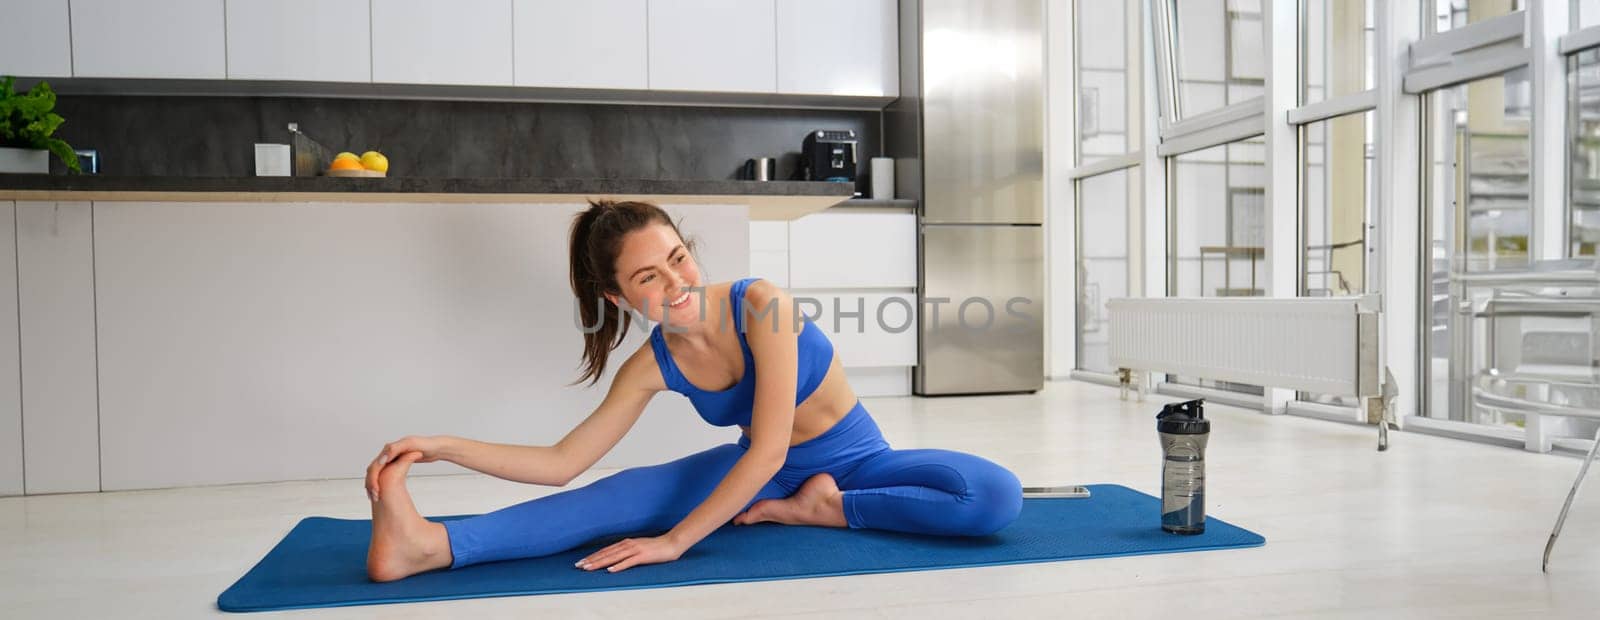 Portrait of young fitness woman doing aerobics exercises, gymnastics training at home, stretching her legs before splits workout, sitting on floor, rubber blue mat.